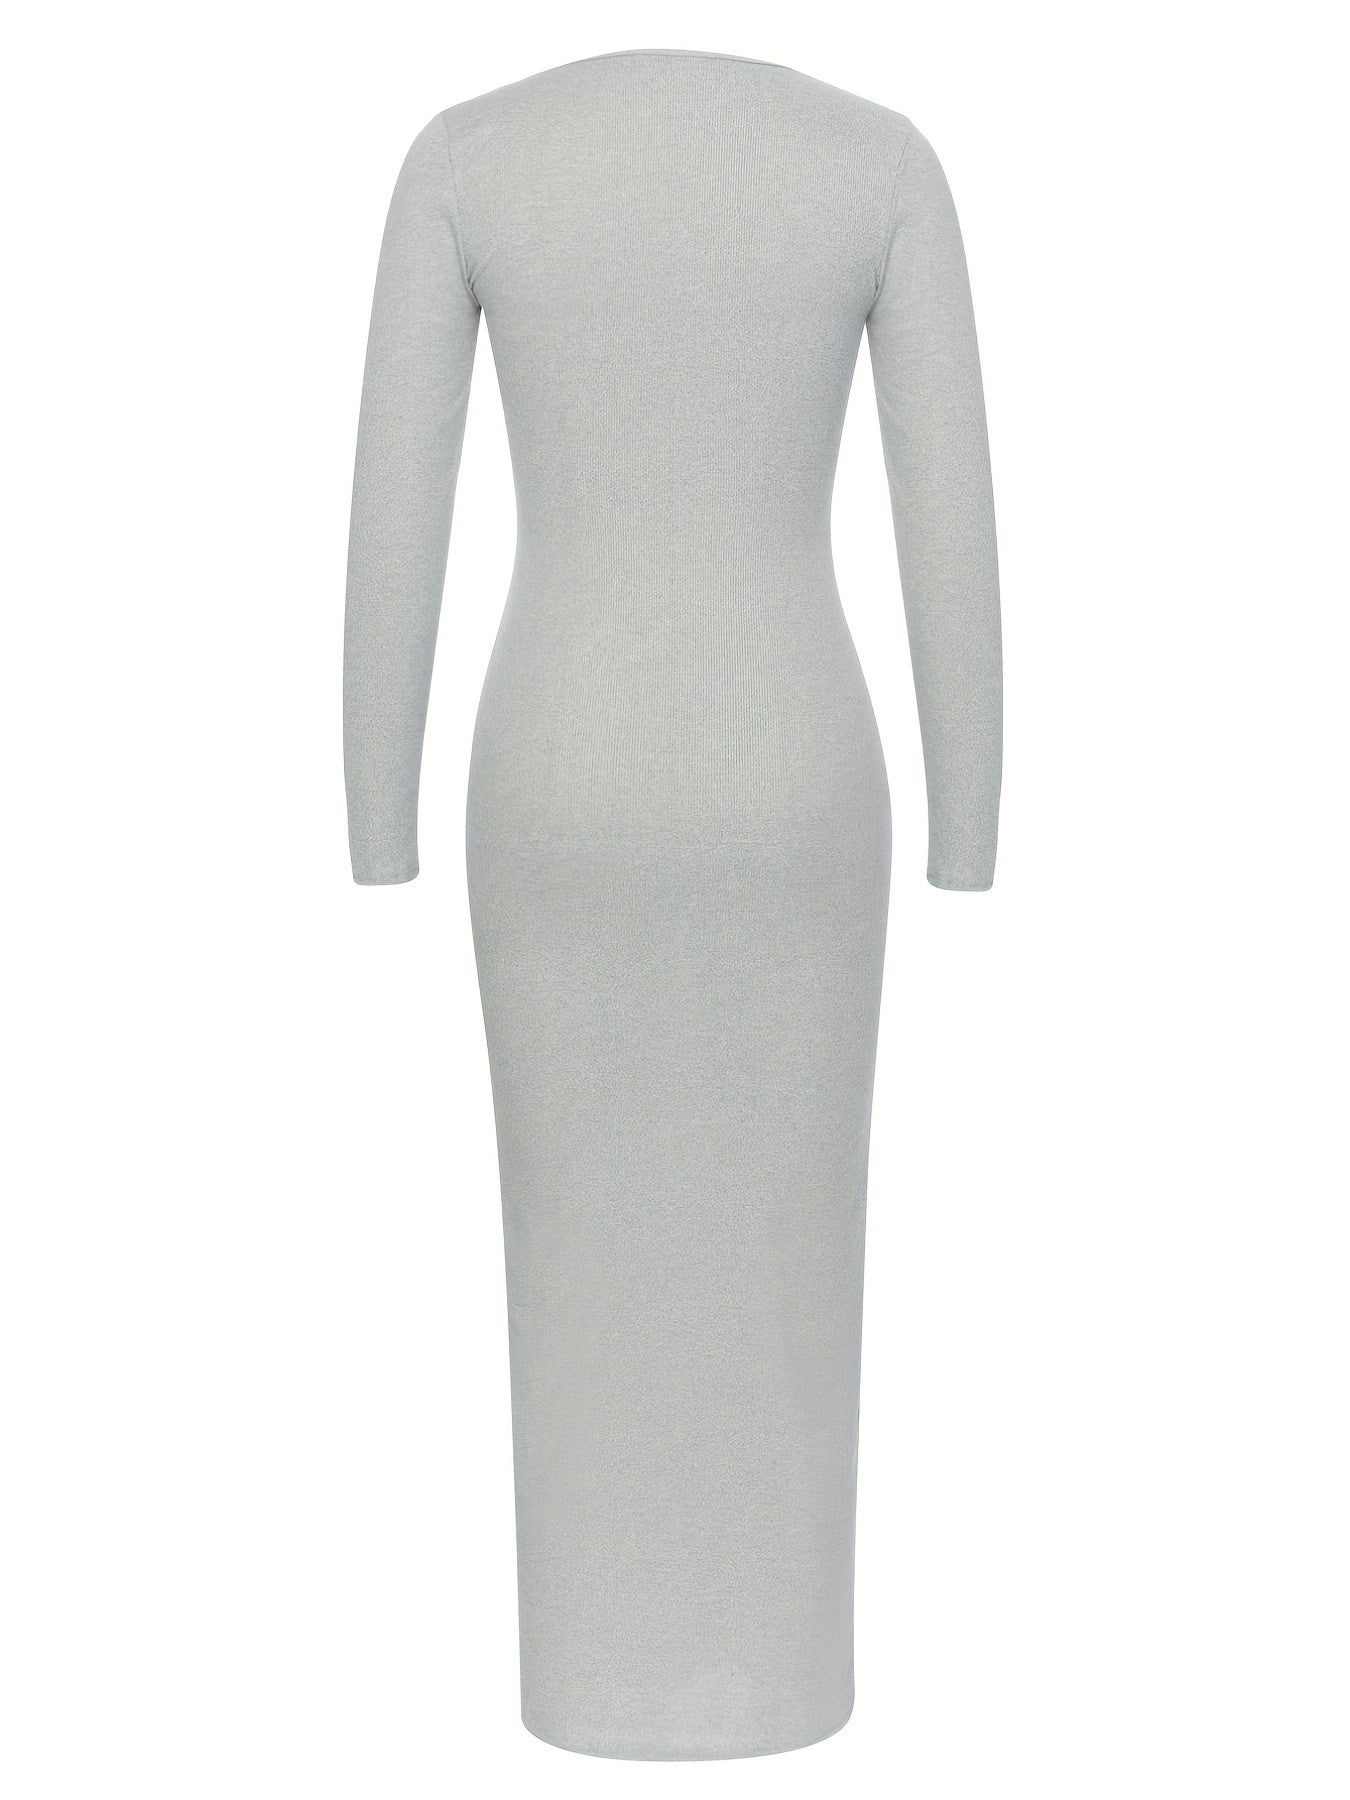 vlovelaw  Squared Neck Bodycon Dress, Sexy Long Sleeve Solid Maxi Dress, Women's Clothing